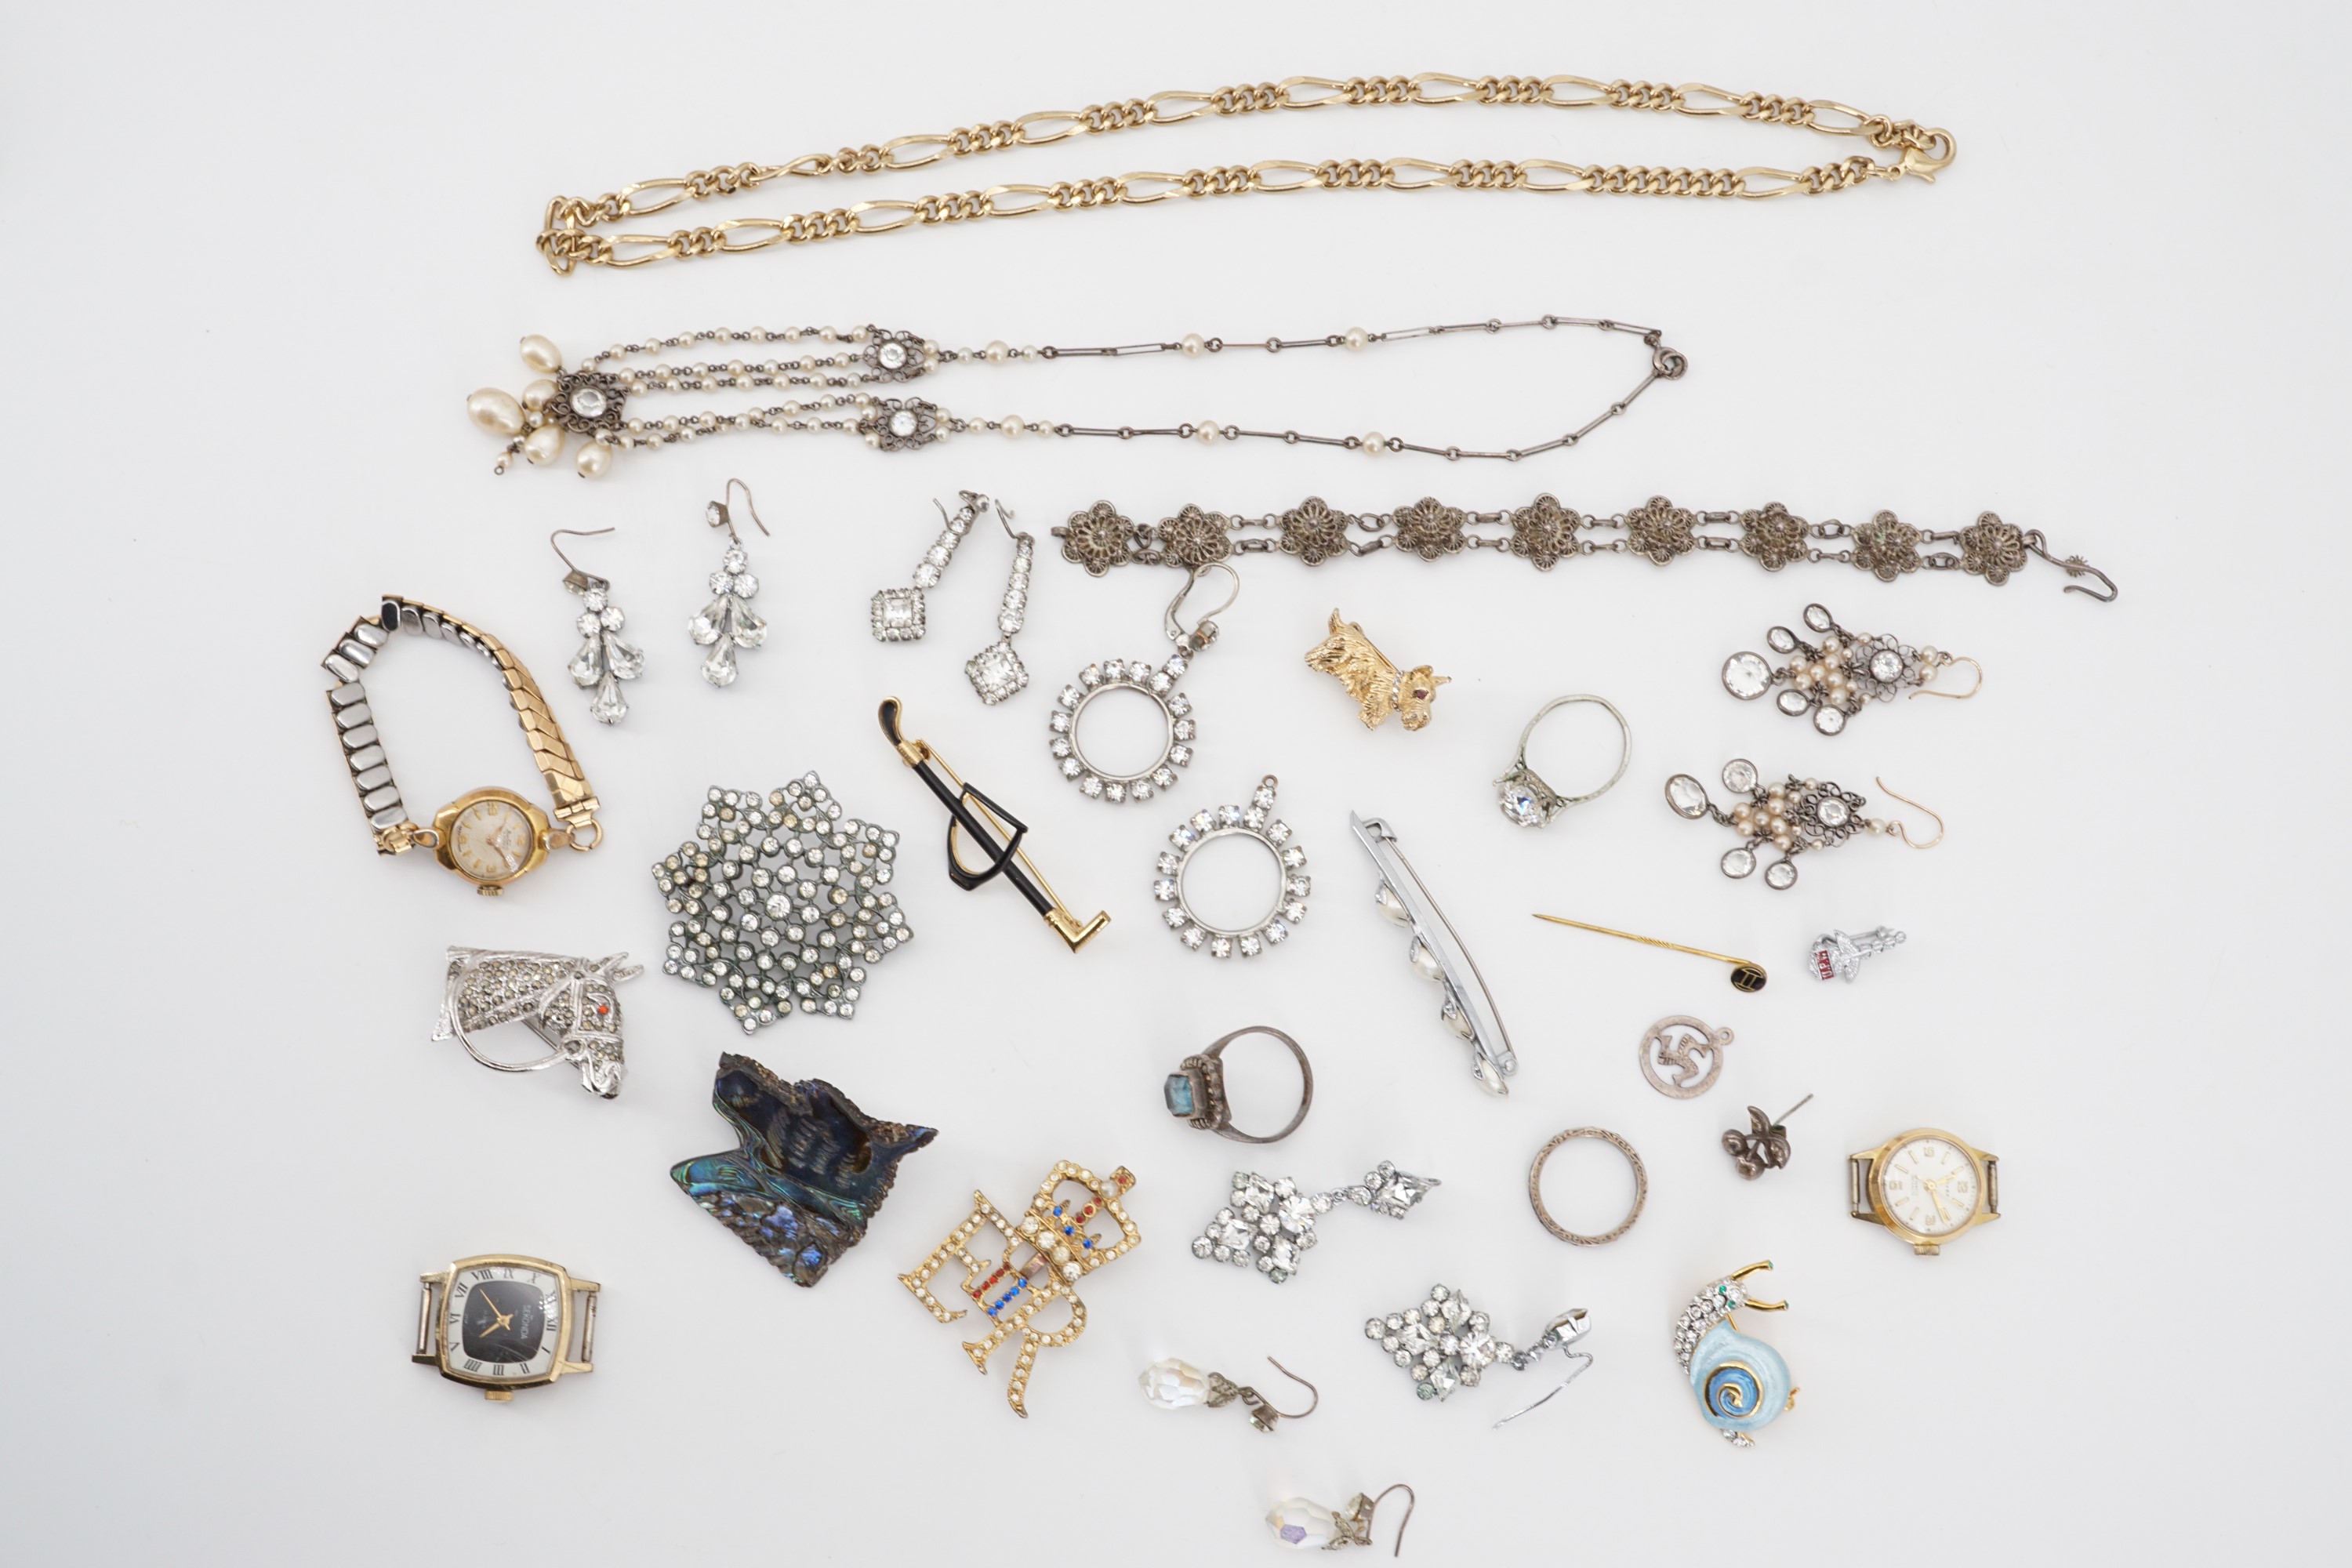 Vintage costume jewellery, including paste ear pendants, brooches, a white metal filigree